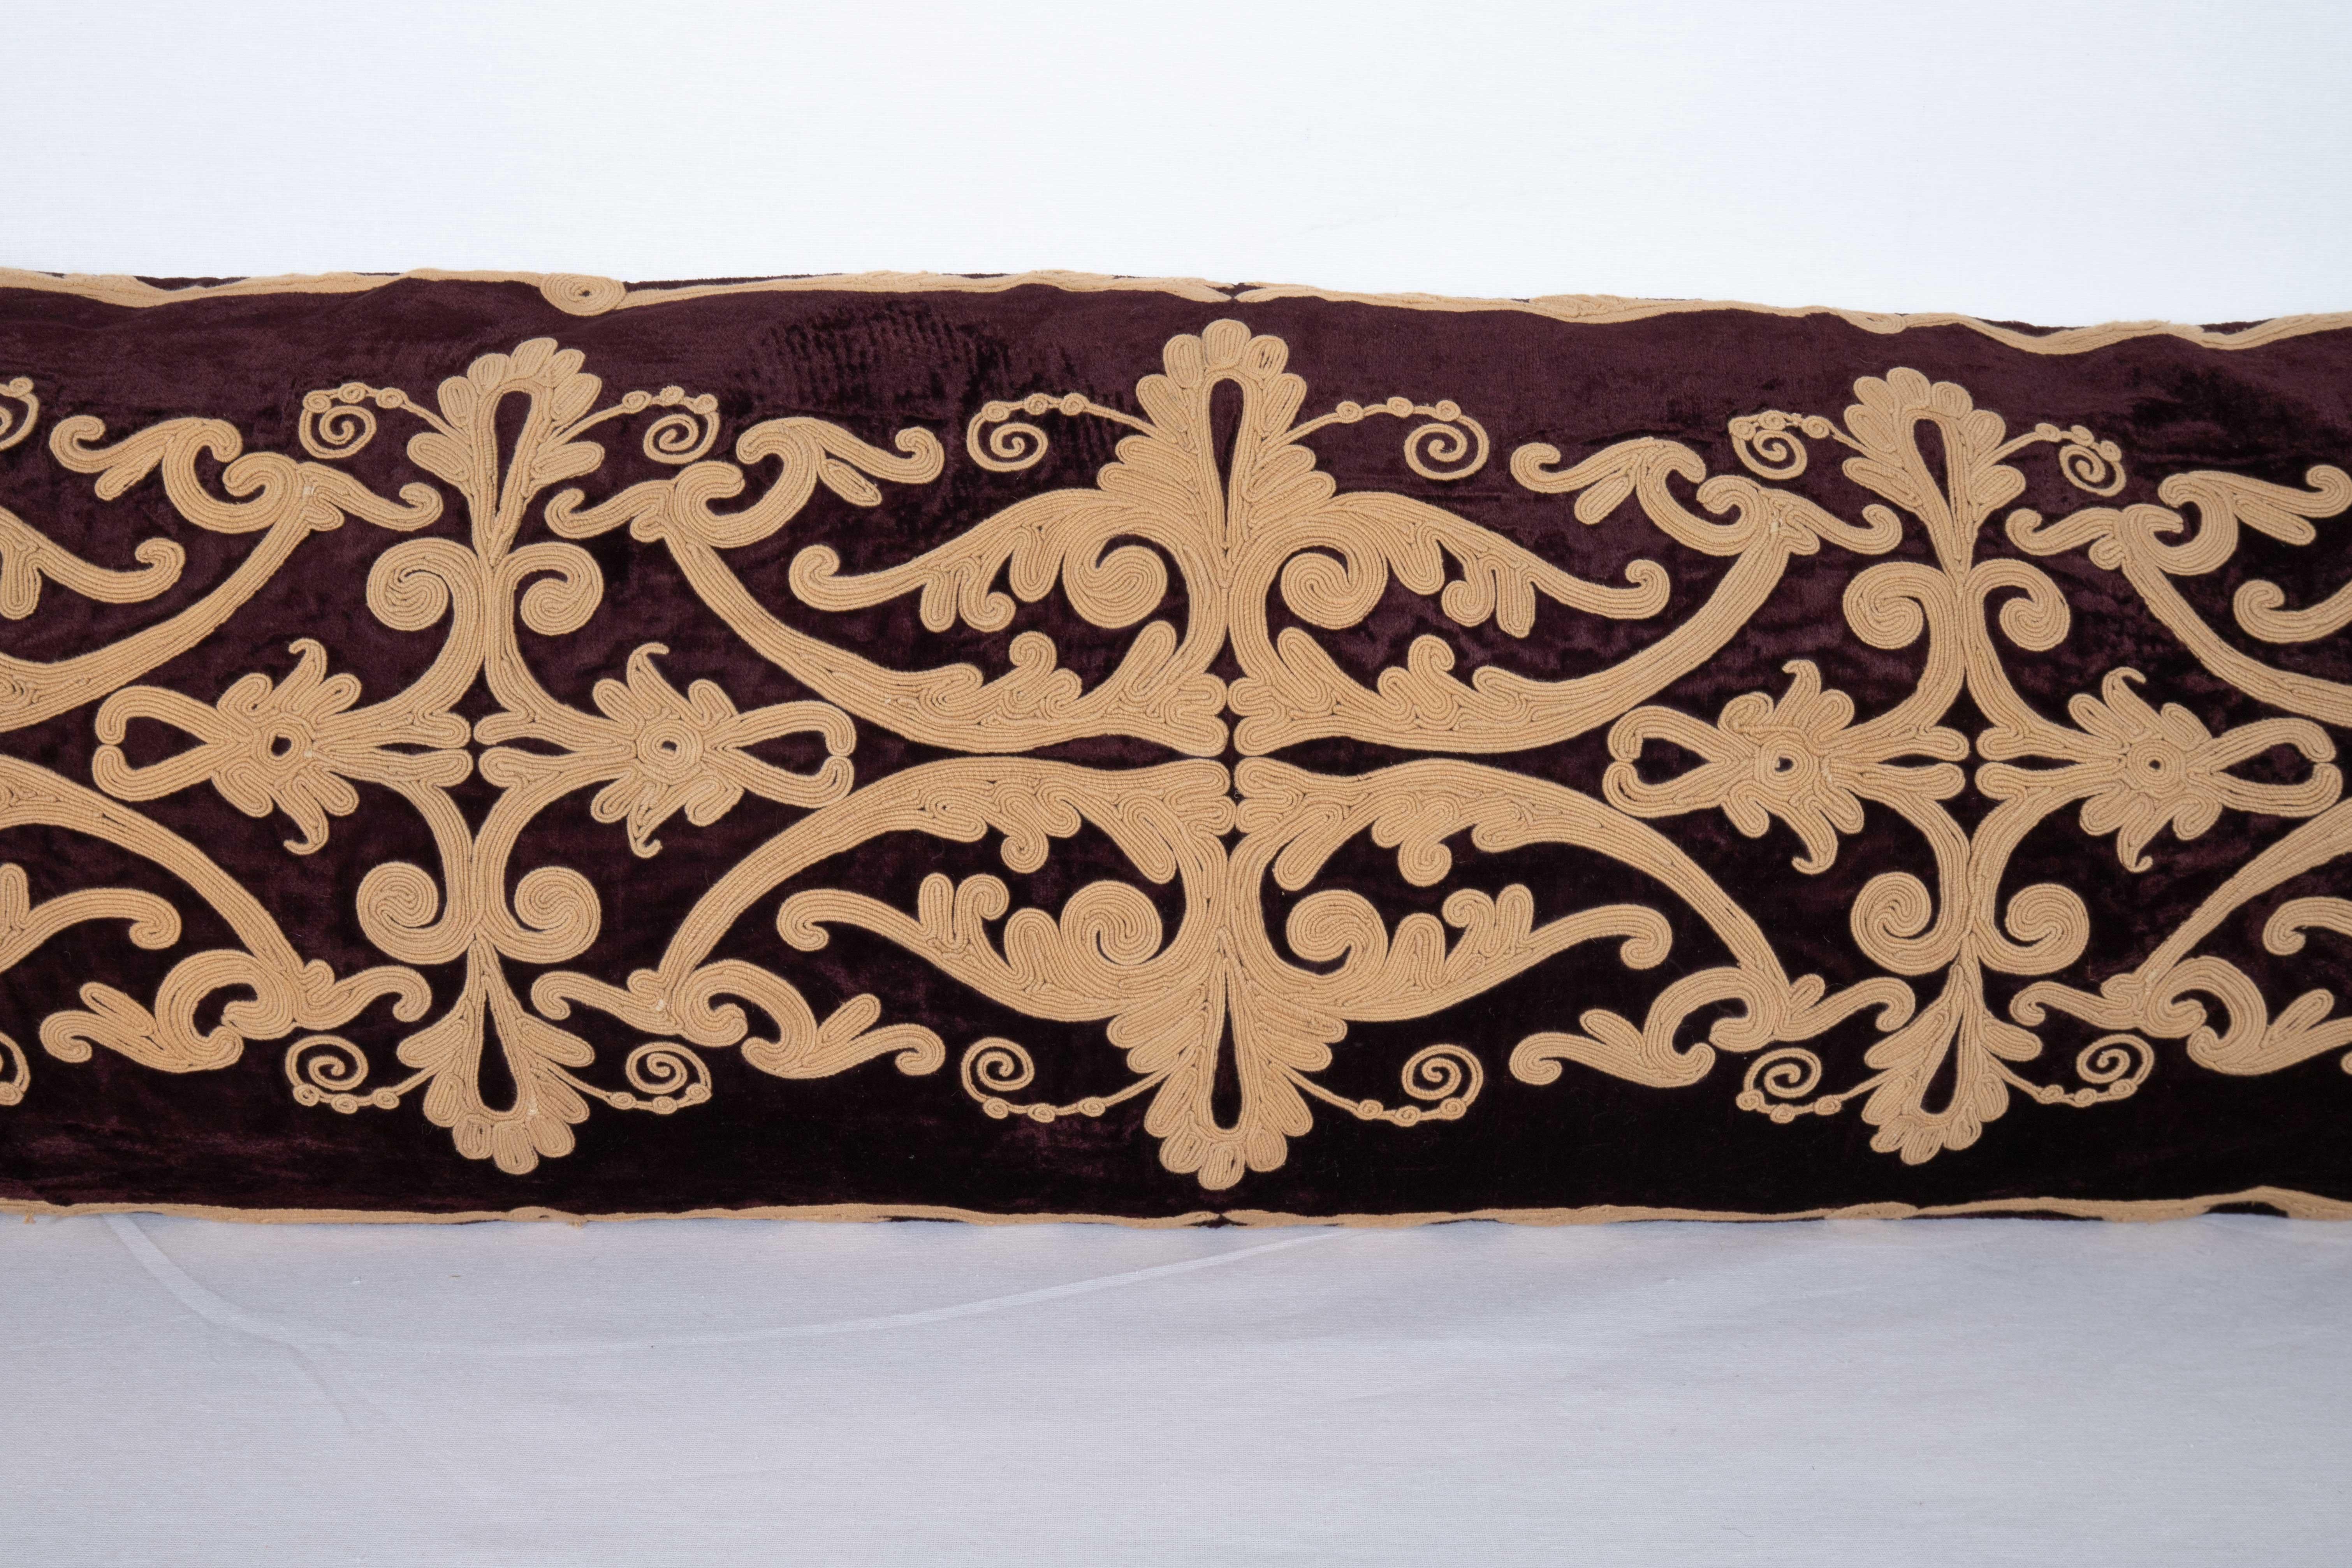 Embroidered Velvet Couched Embroidery Body Pillow, Early 20yj C.